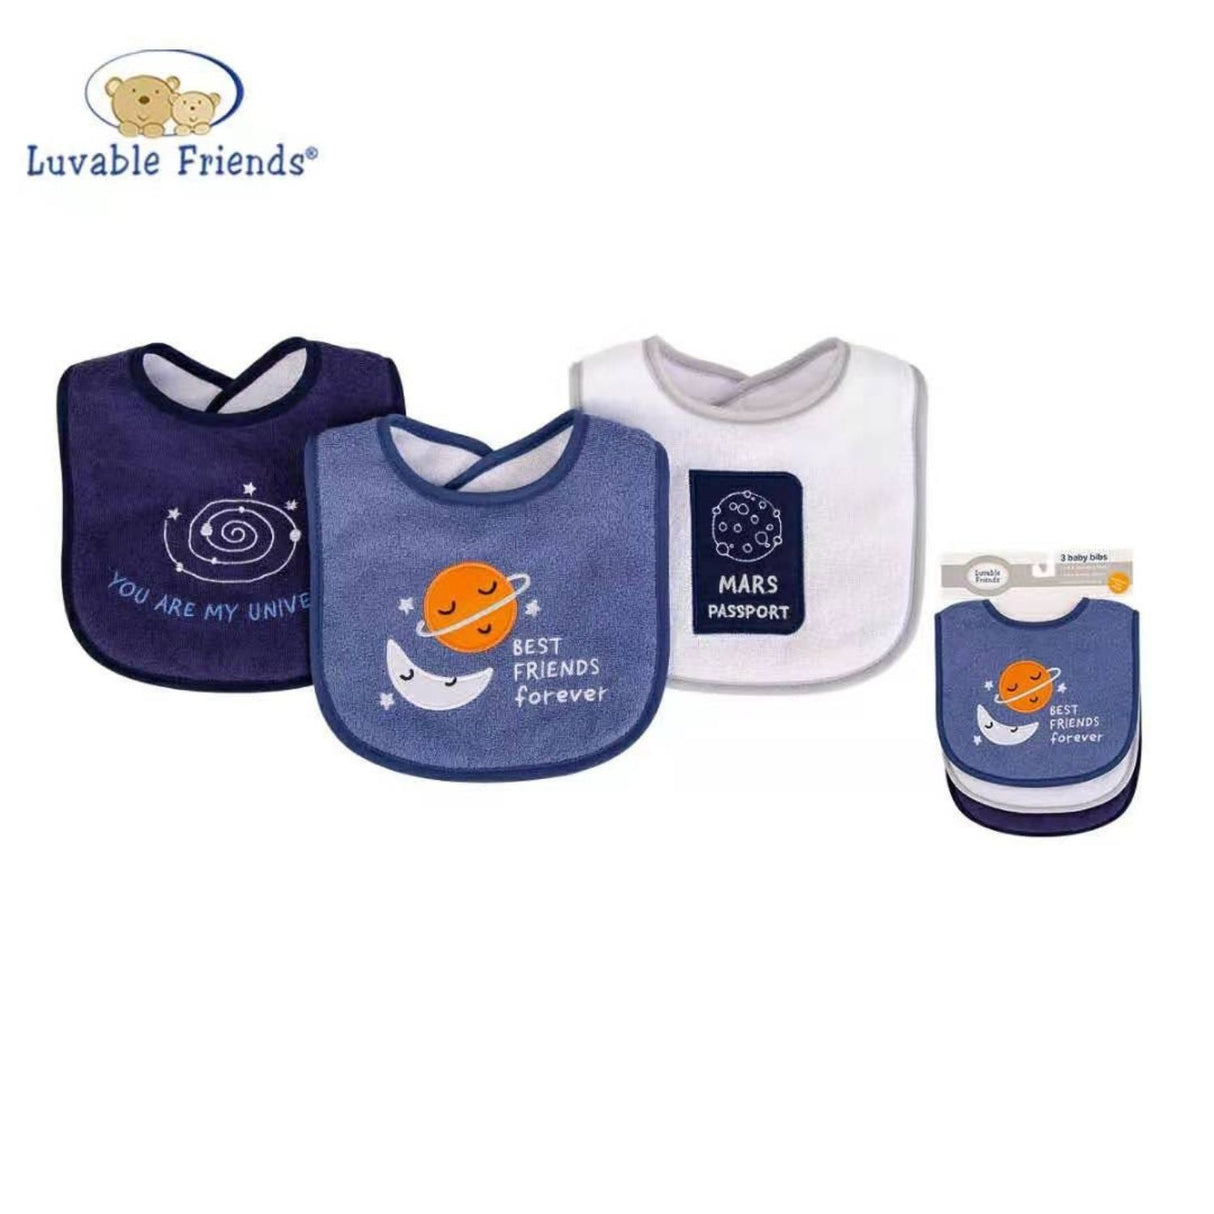 Luvable Friends Cute And Stylish Pack Of 3 Cotton Bibs